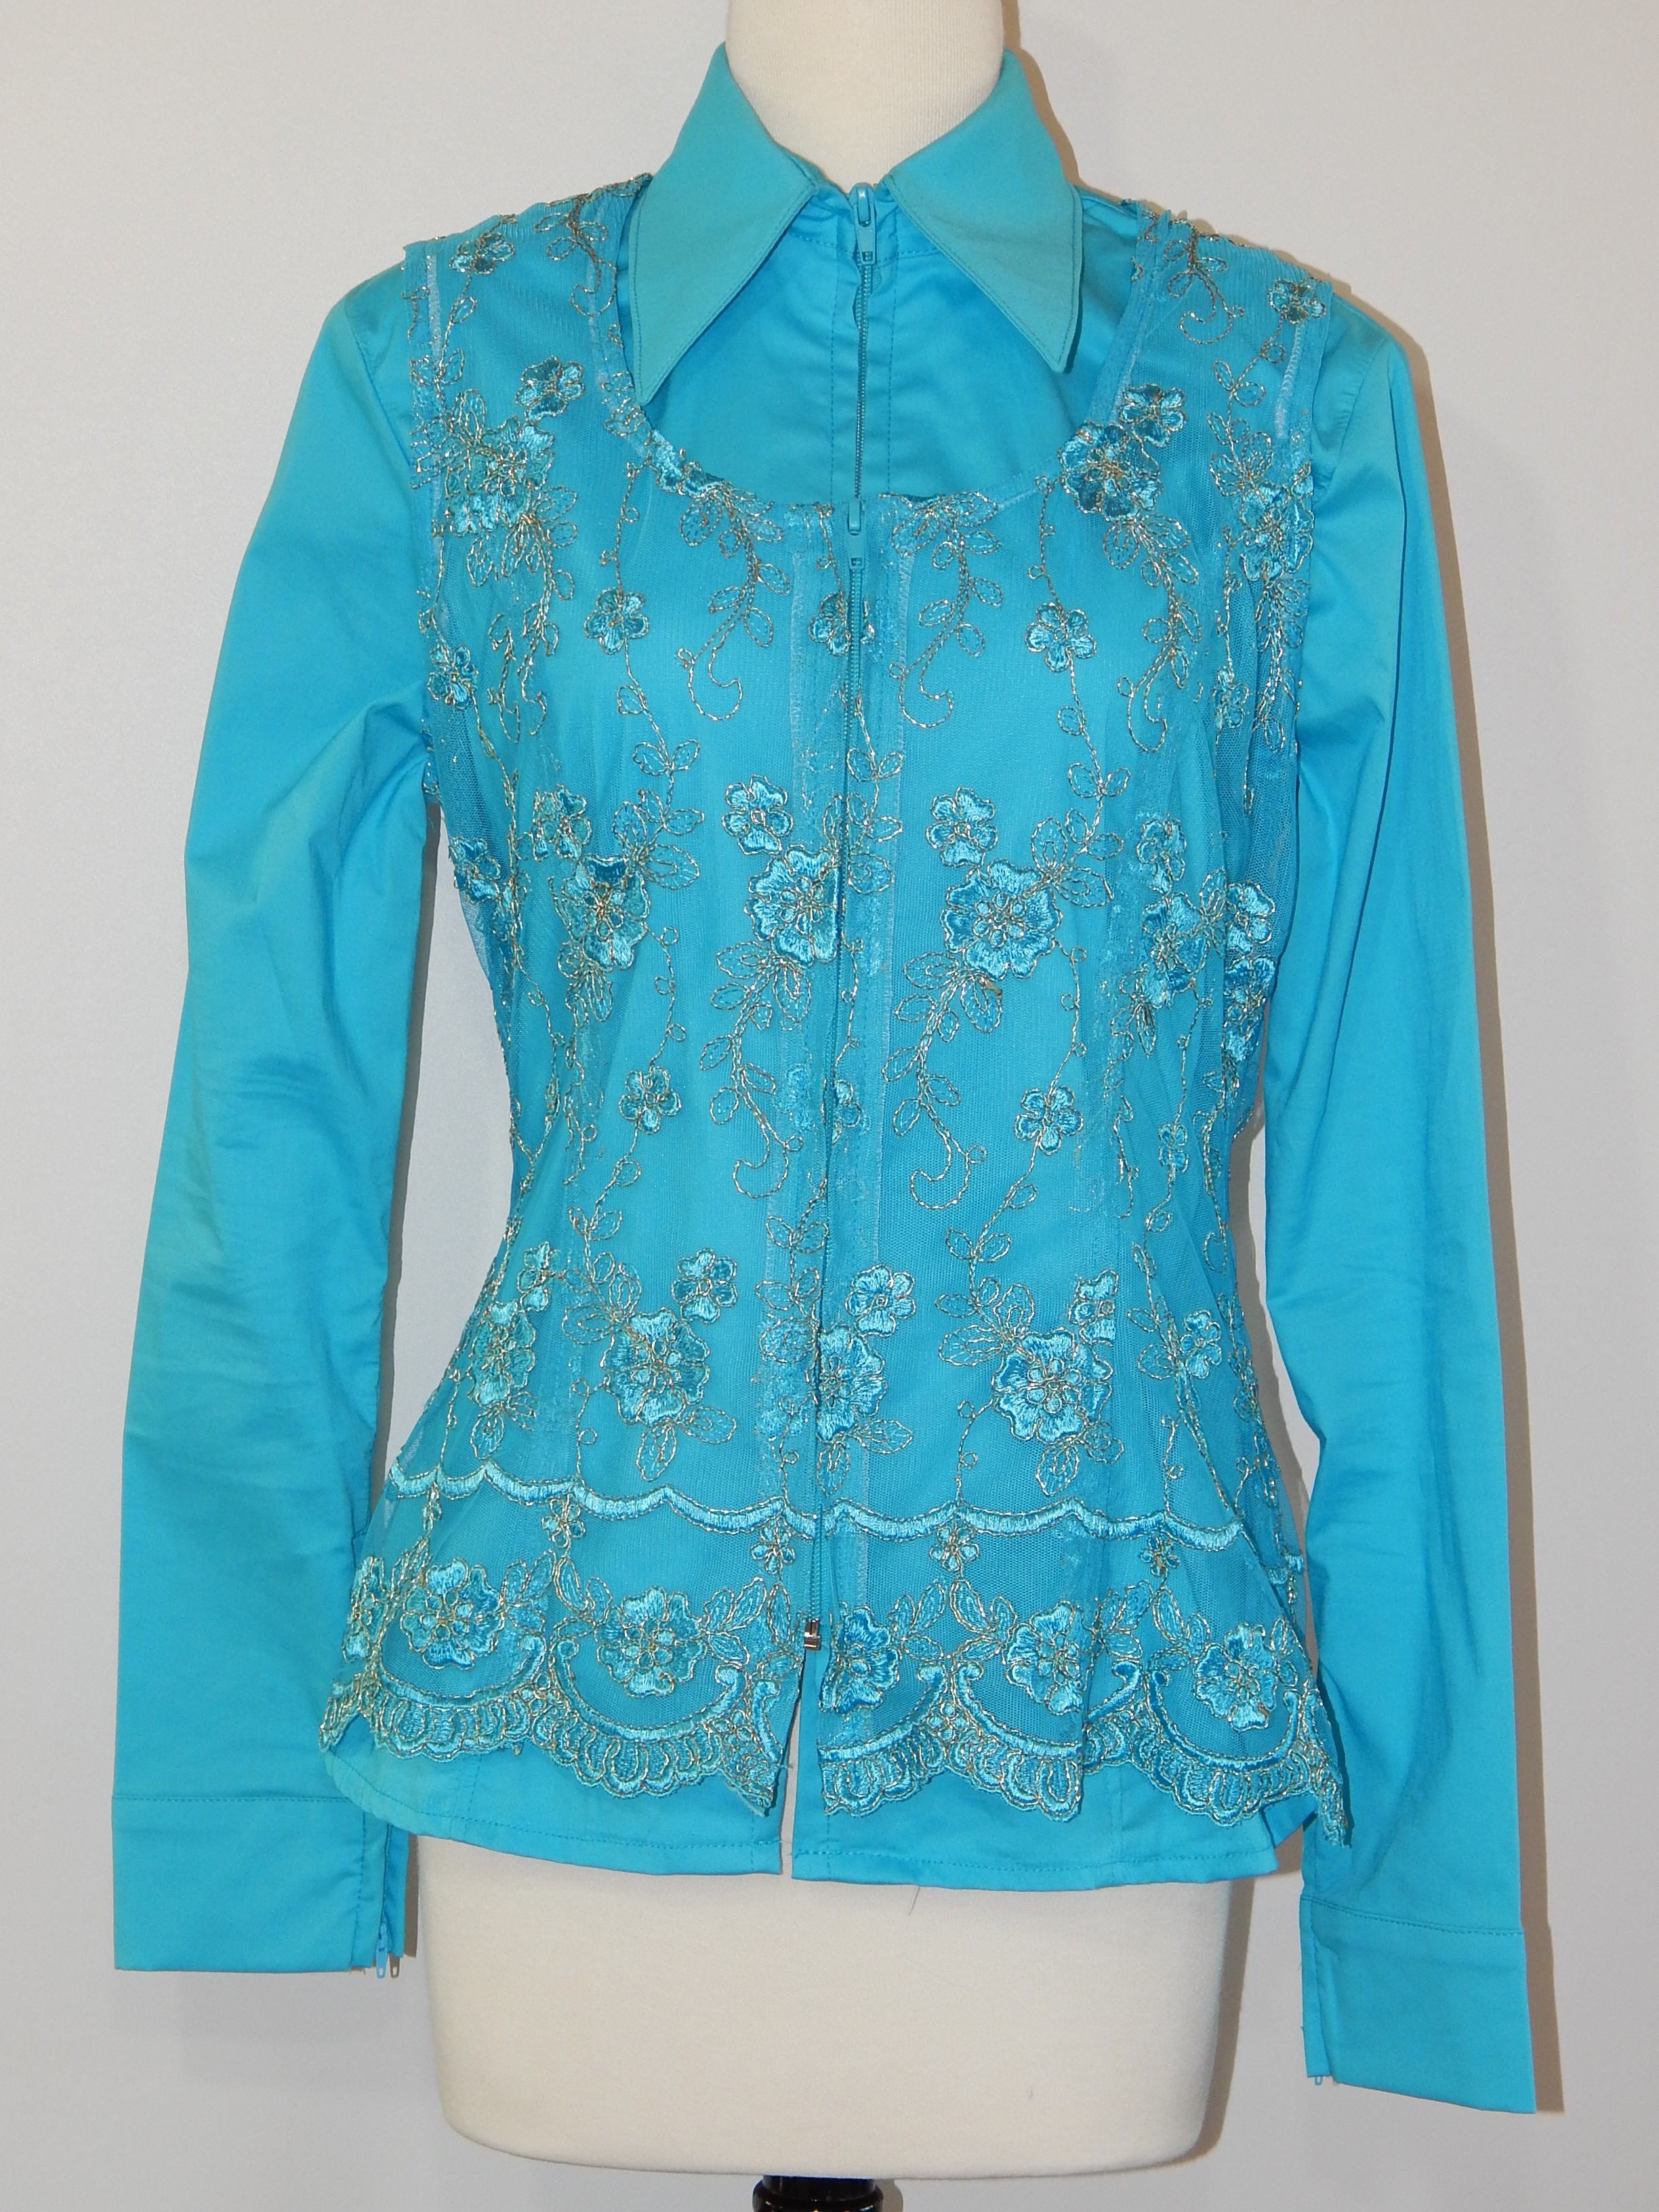 MKC Lace Vest - Turquoise/Gold Thread